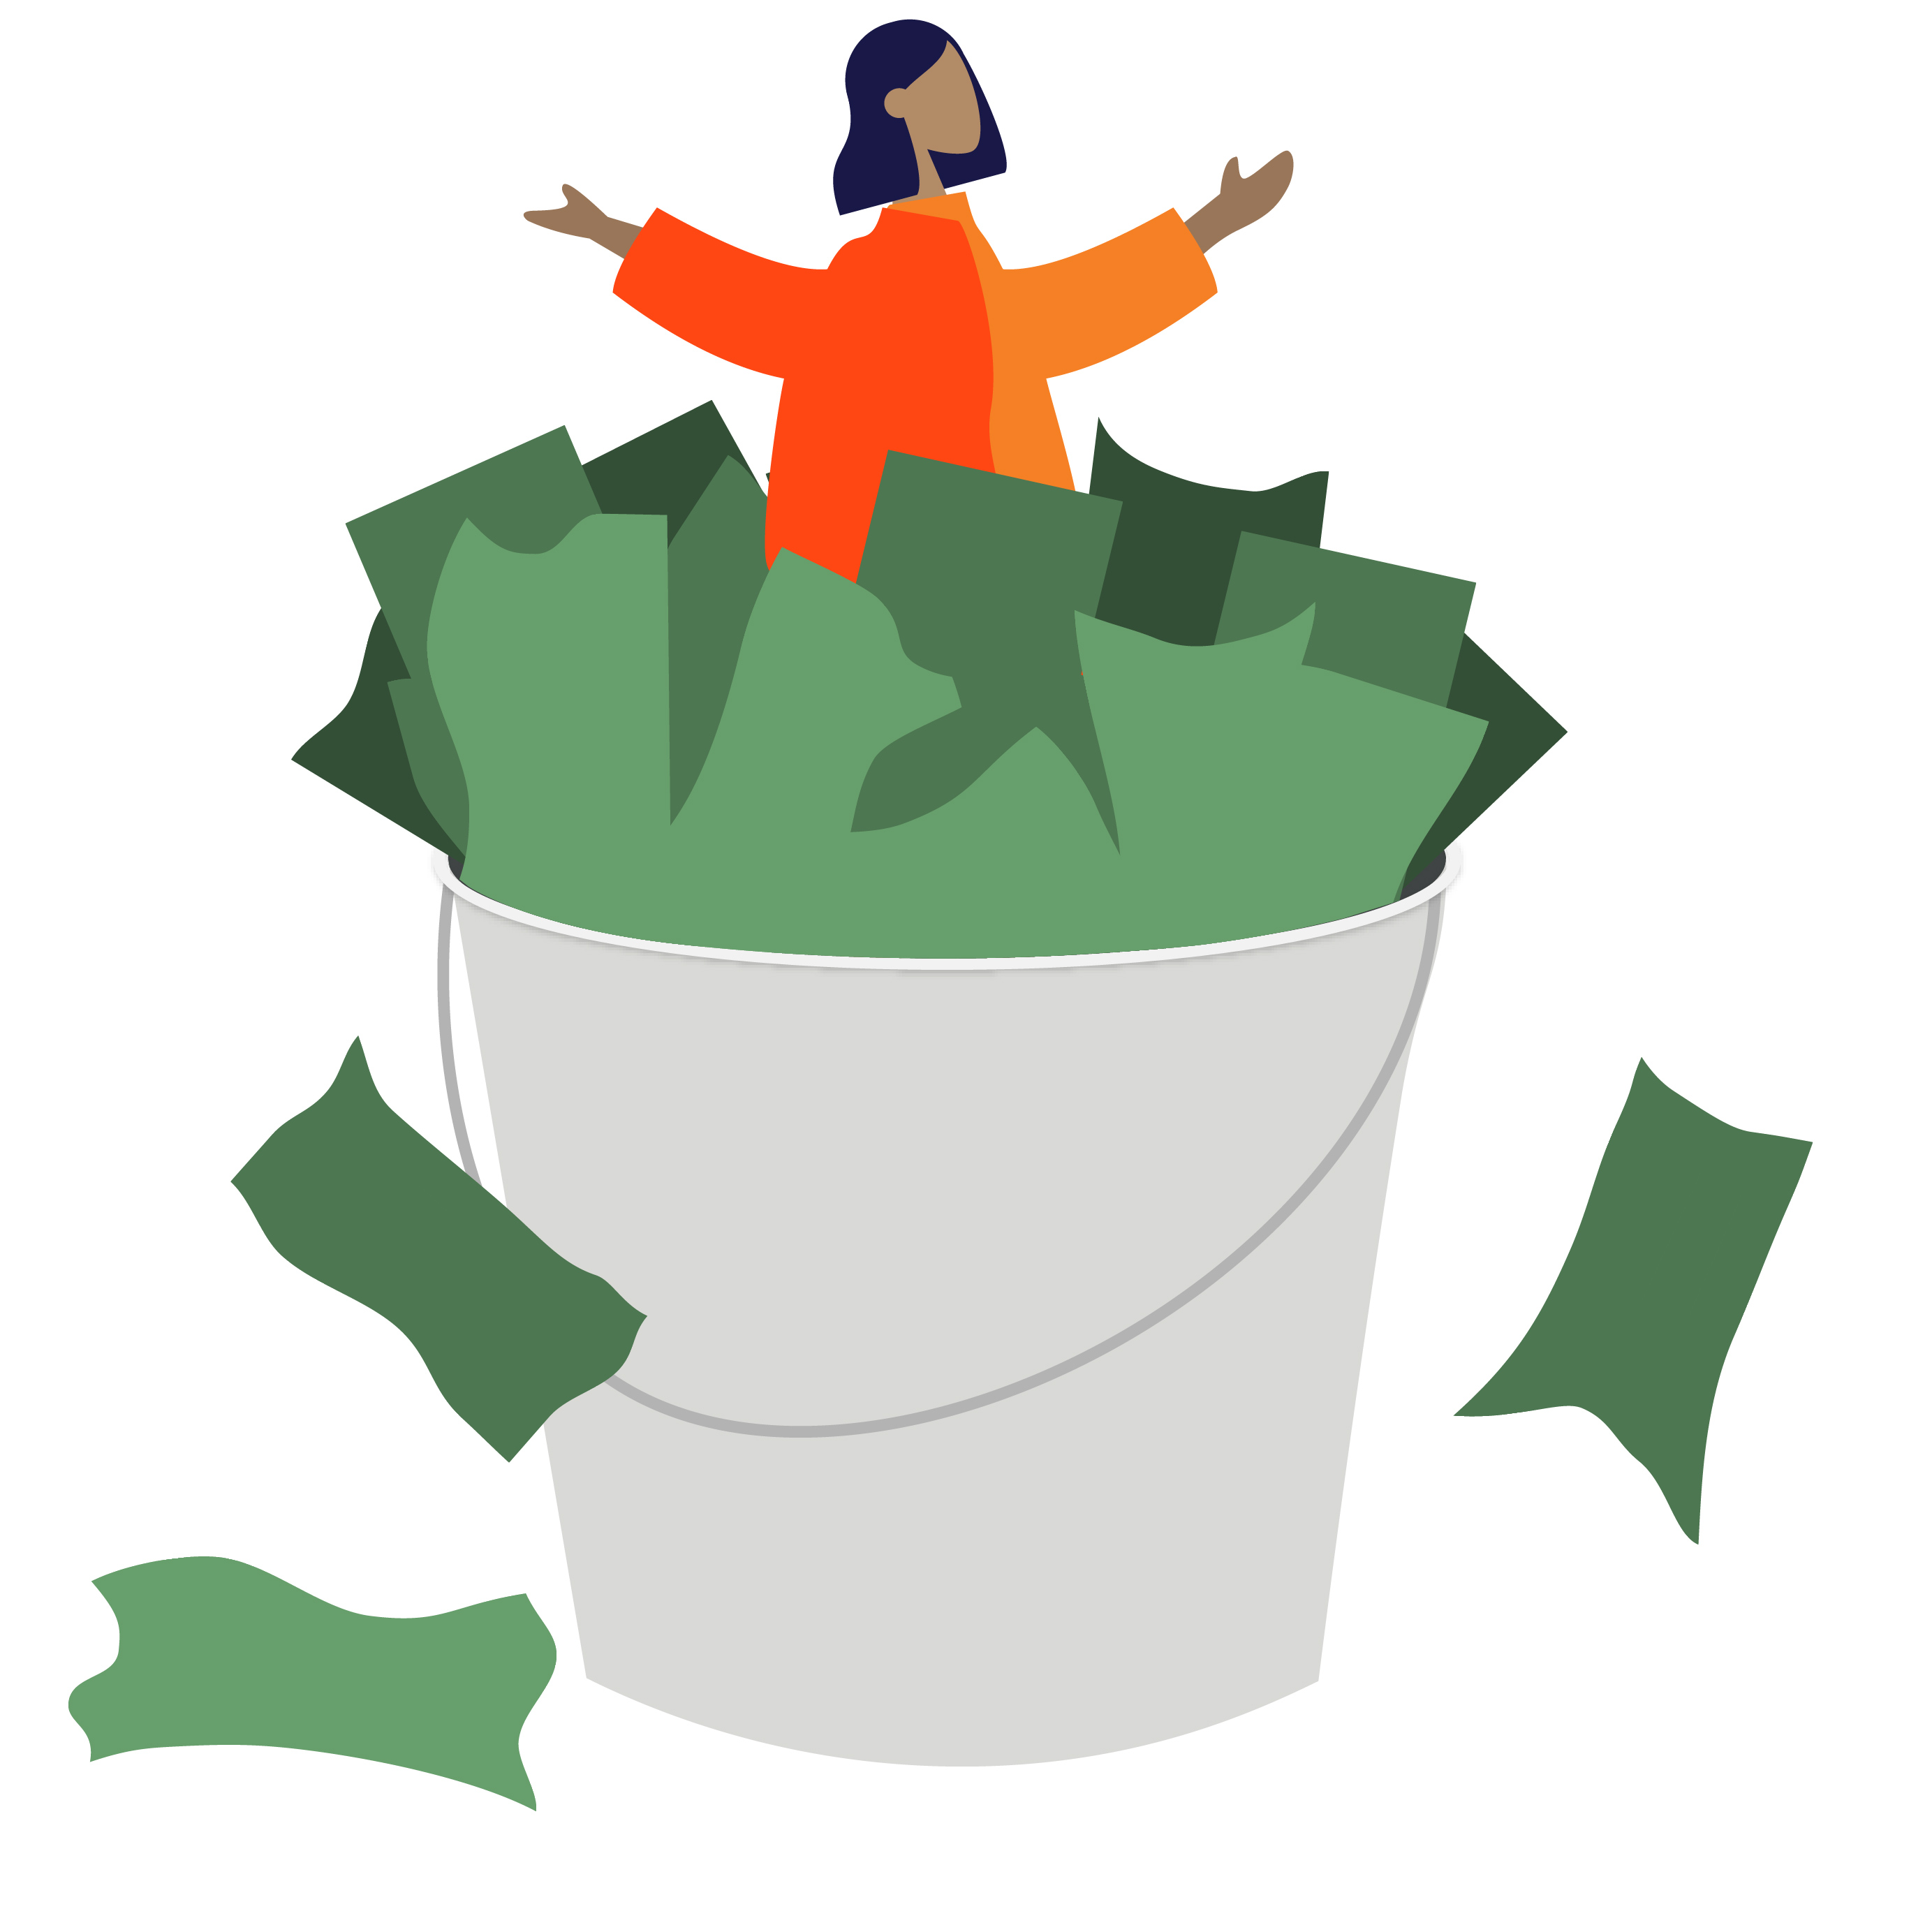 Student sits in a bucket full of dollar bills